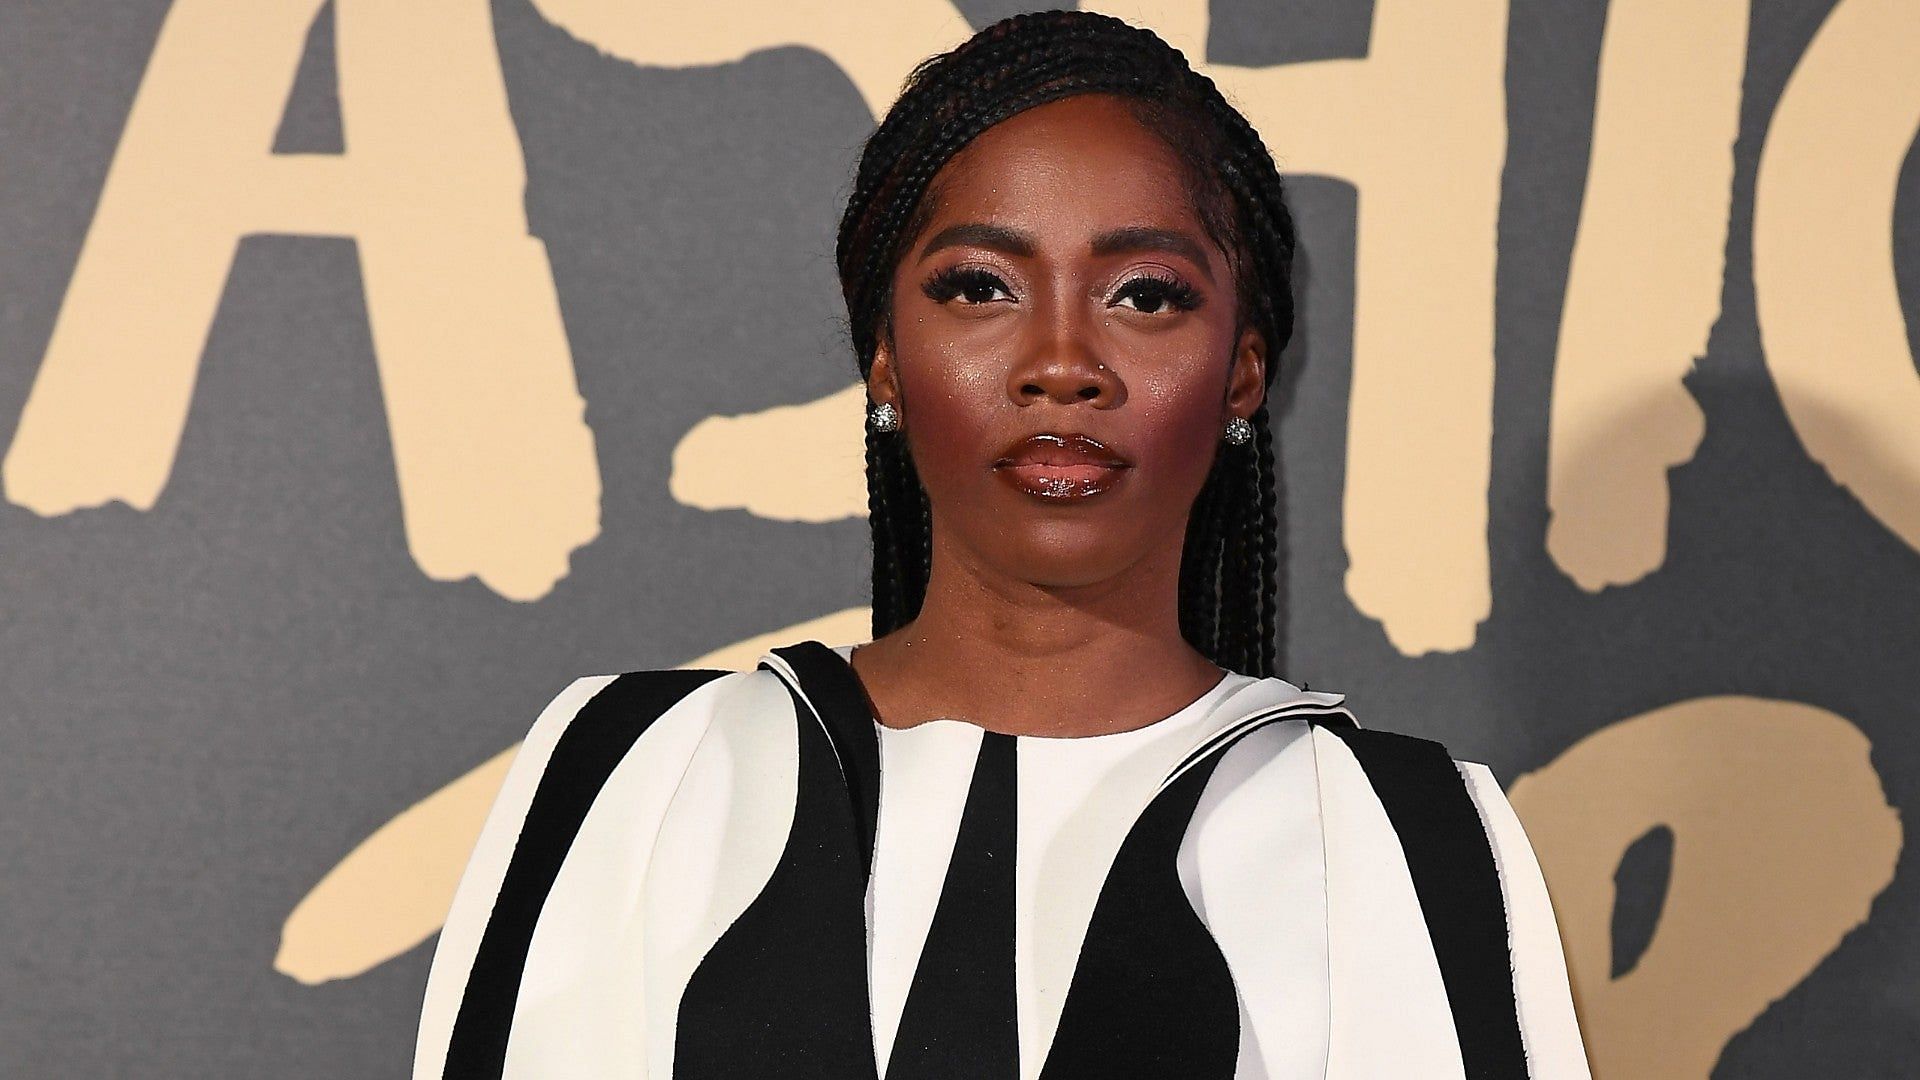 Tiwa Savage&#039;s trending video recently took Twitter by storm (Image via Getty Images)